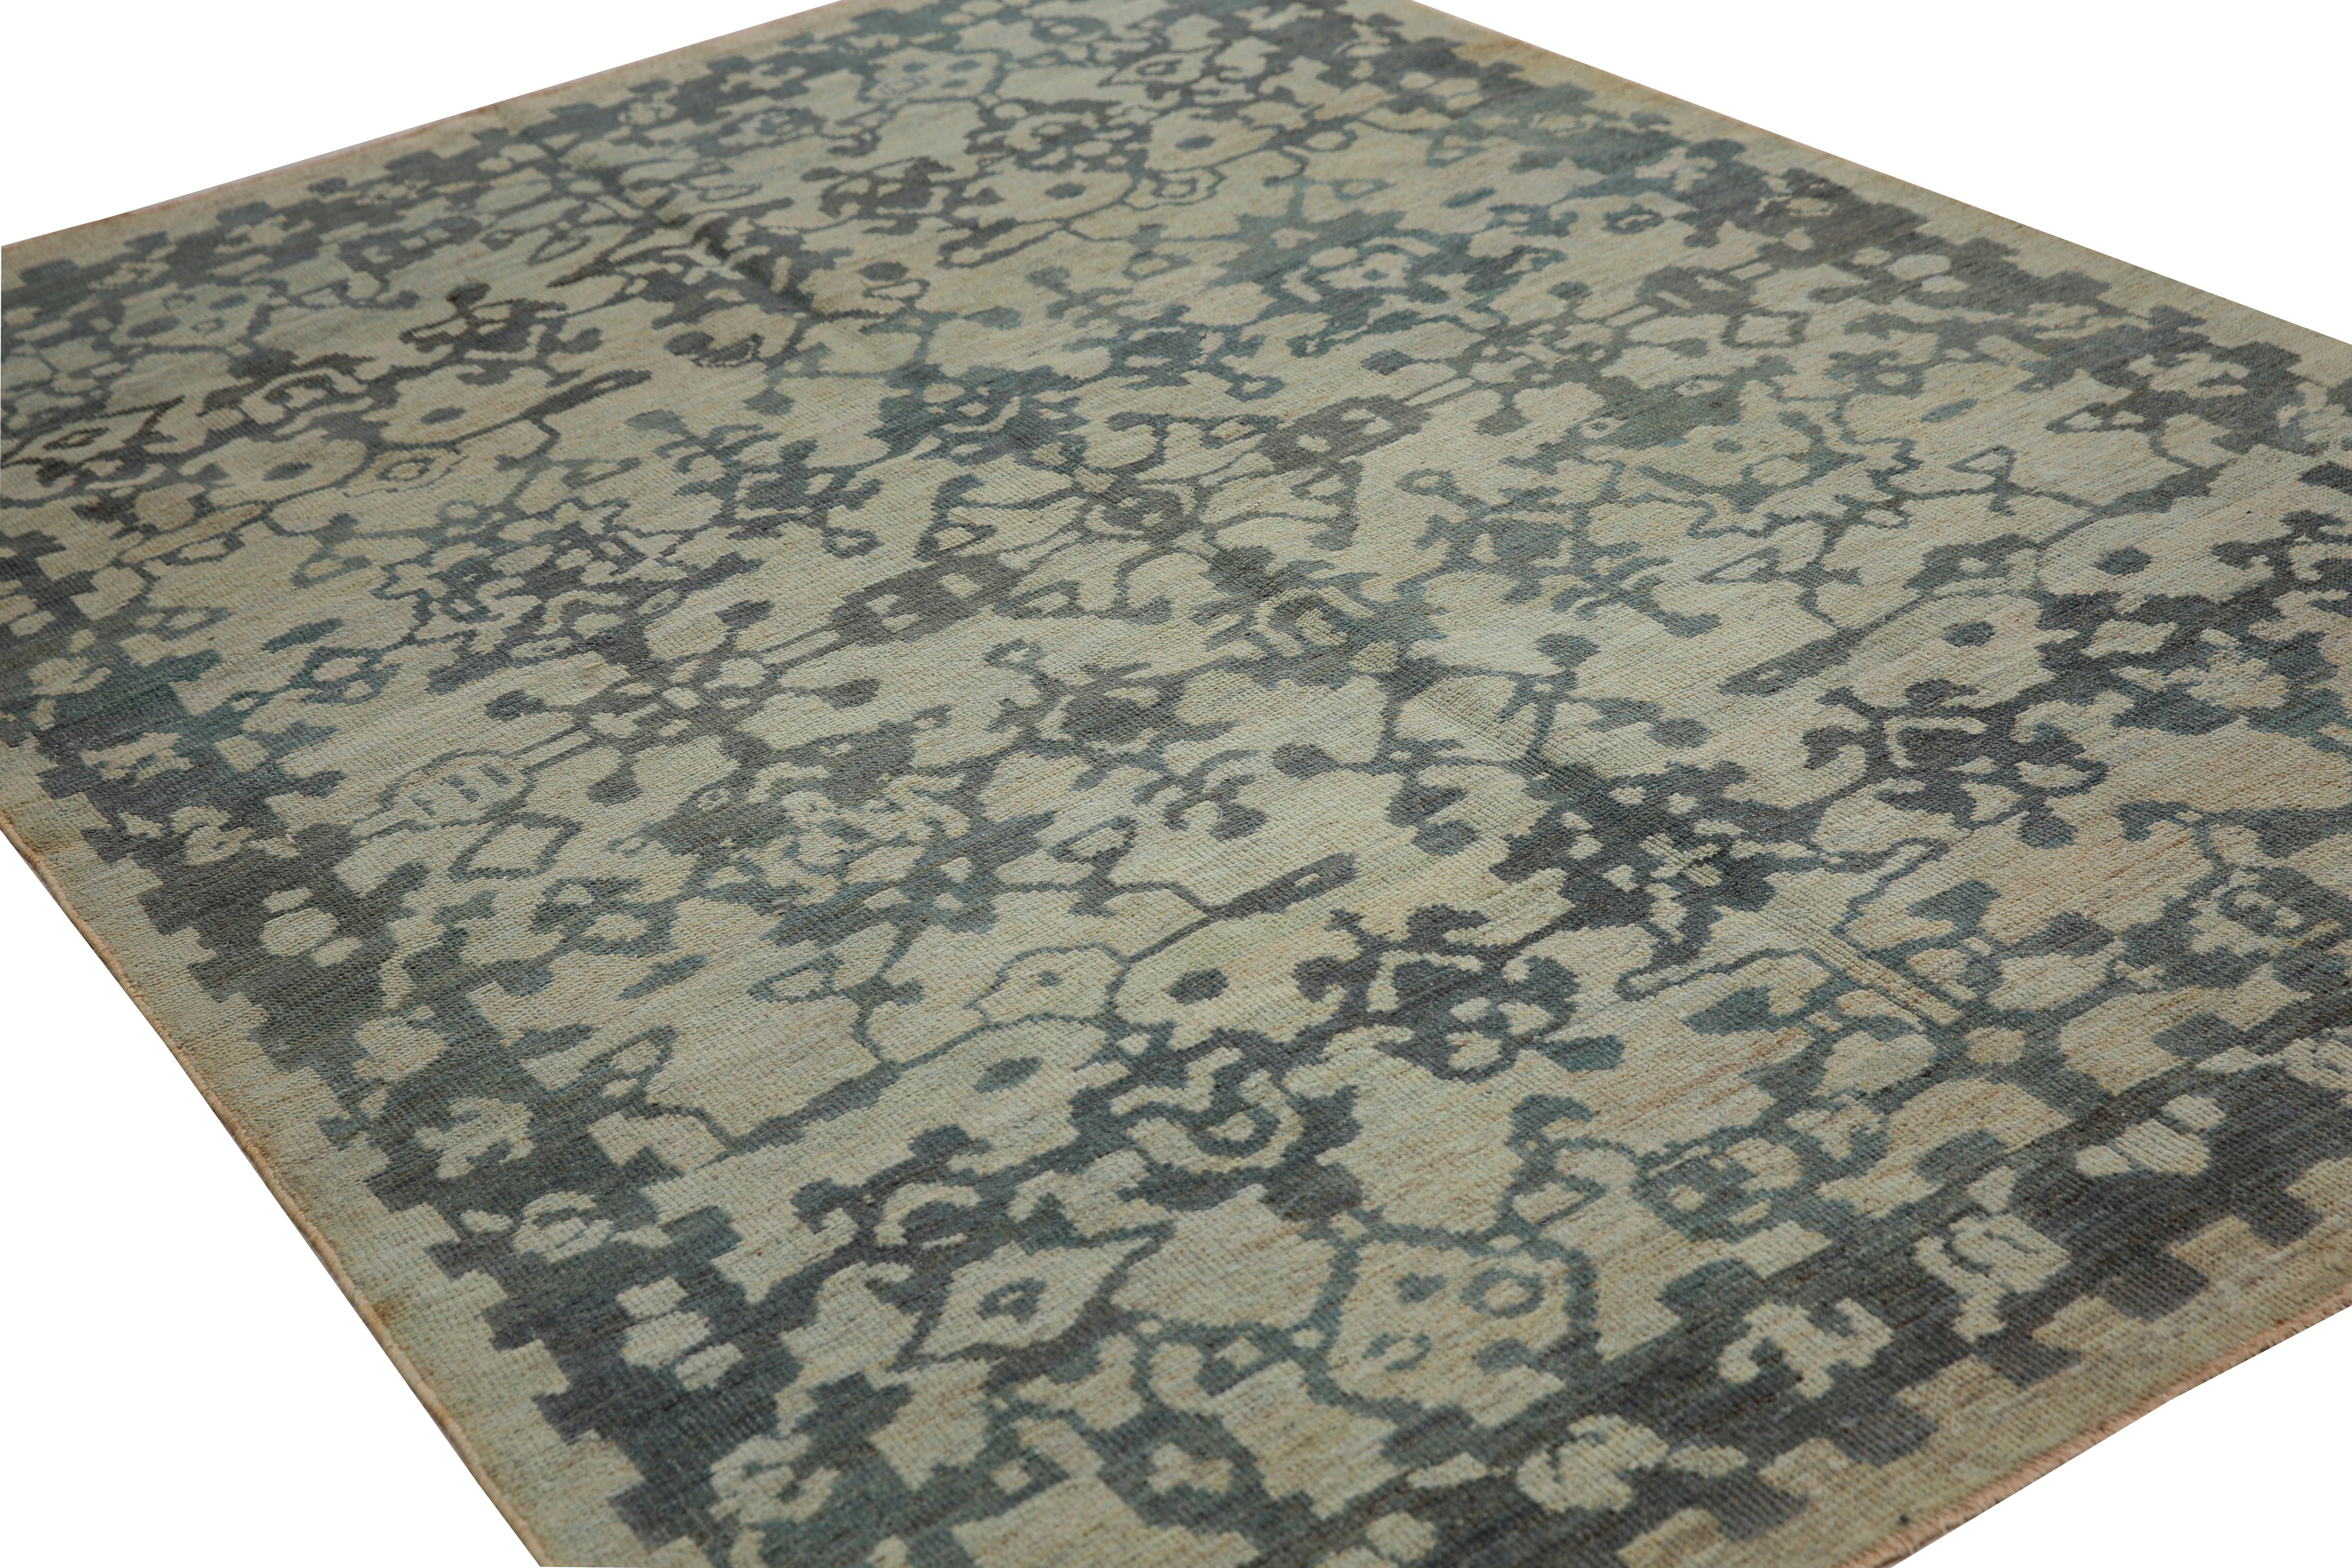 Luxurious Handmade Sultanabad Rug - Transitional Design, Blue Tones - 5'10'' x 8 For Sale 5